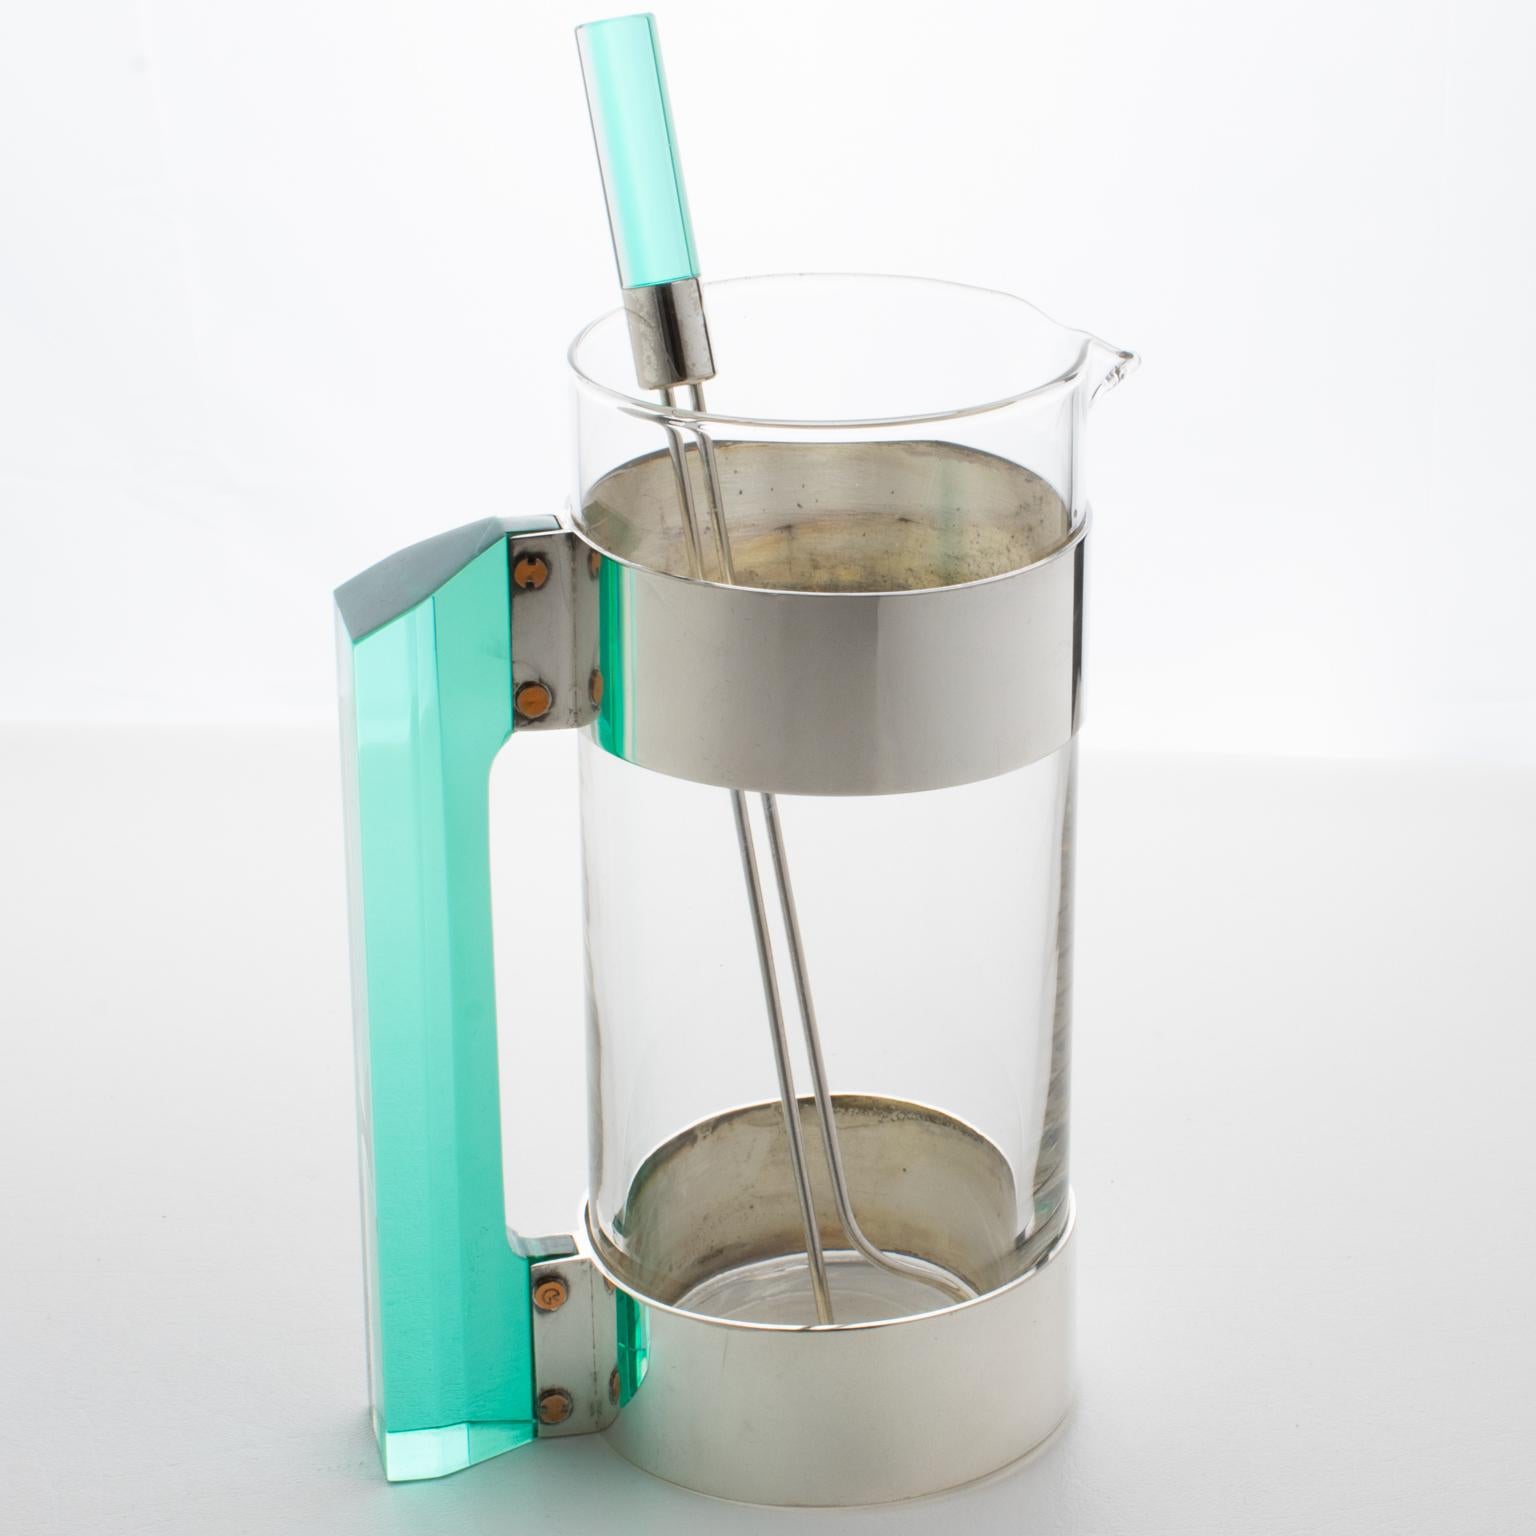 Italian Rede Guzzini designed this stylish barware set in the 1970s. This set includes a Martini cocktail pitcher and its pairing stirrer stick. The molded glass container has a silver plate and copper metal framing complimented with an incredible